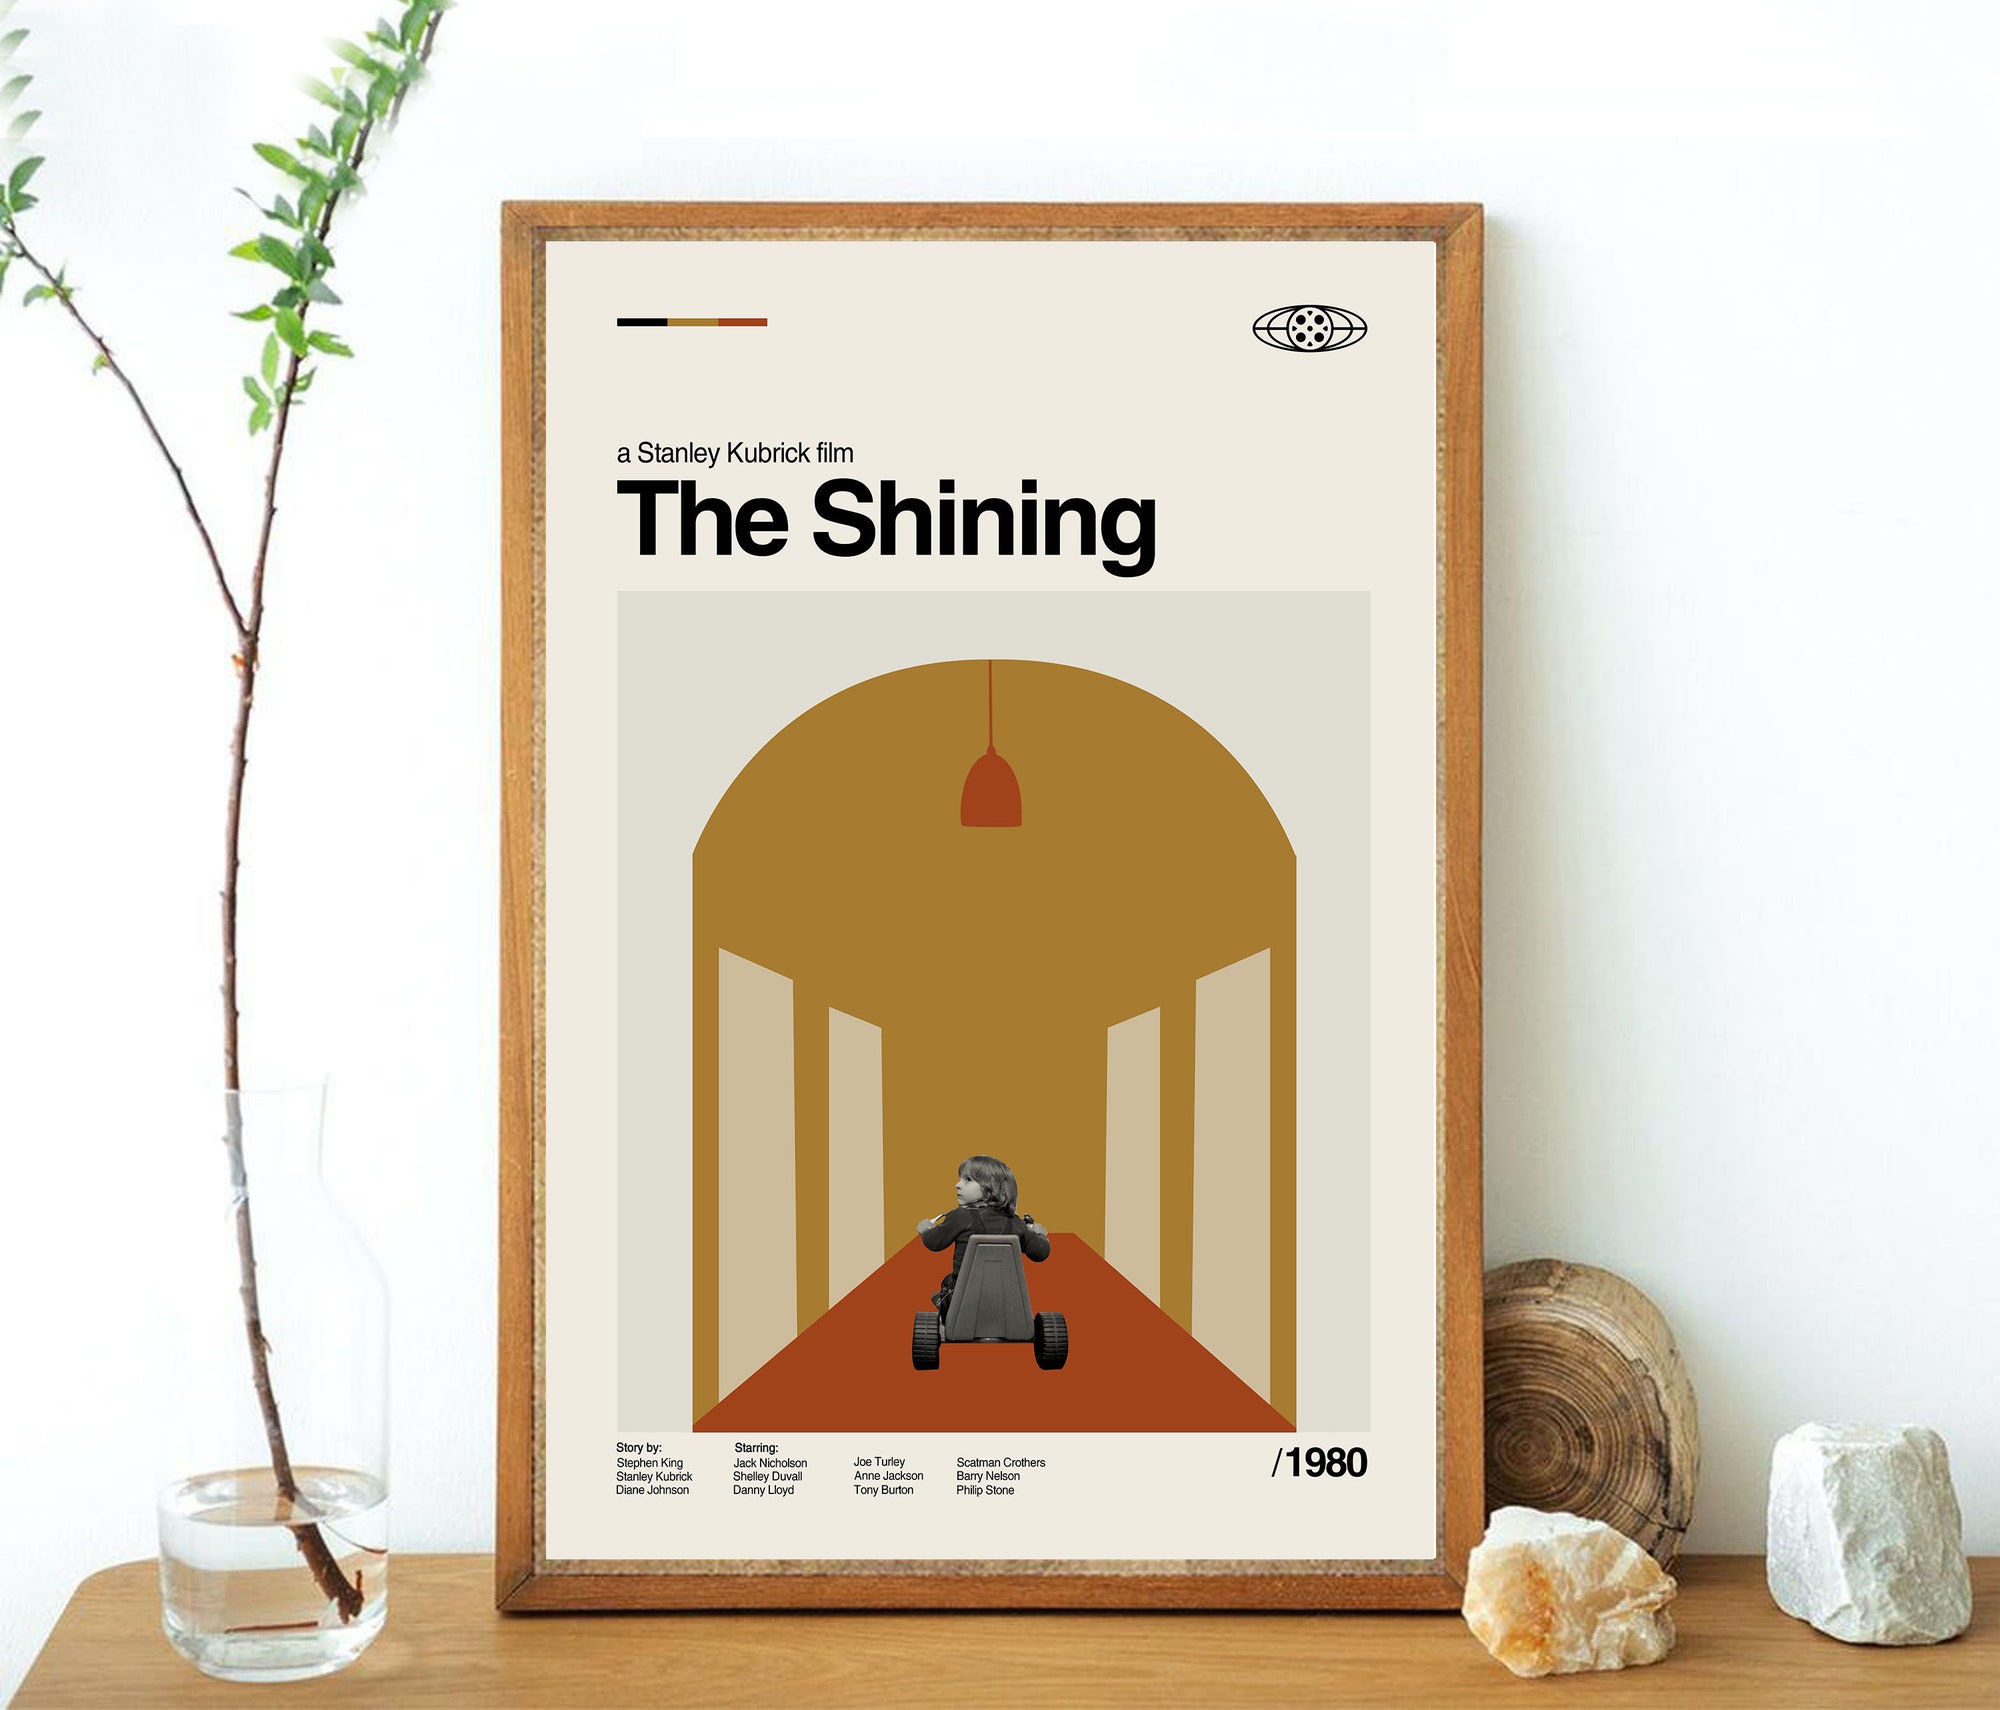 The Shining Movie Poster - retro modern, vintage inspired Poster, Art Print - Abstract Minimalist